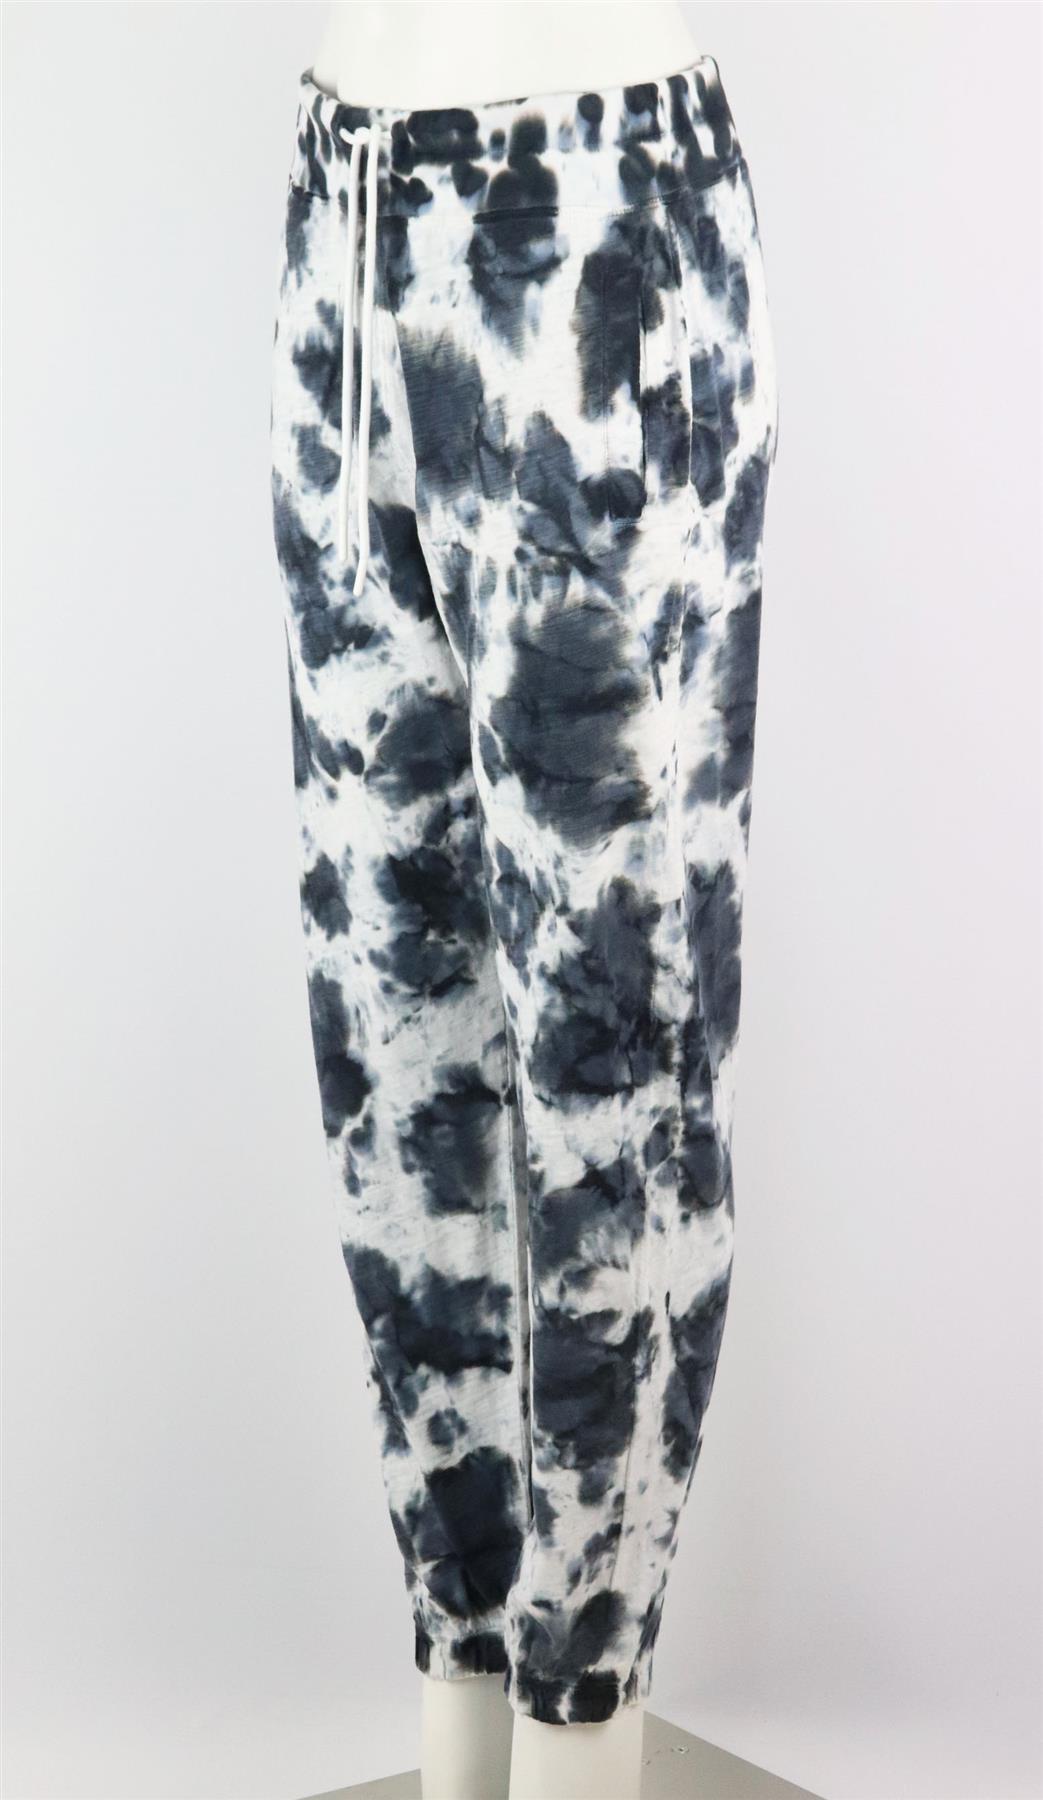 LEALLO TIE DYED COTTON TRACK PANTS LARGE